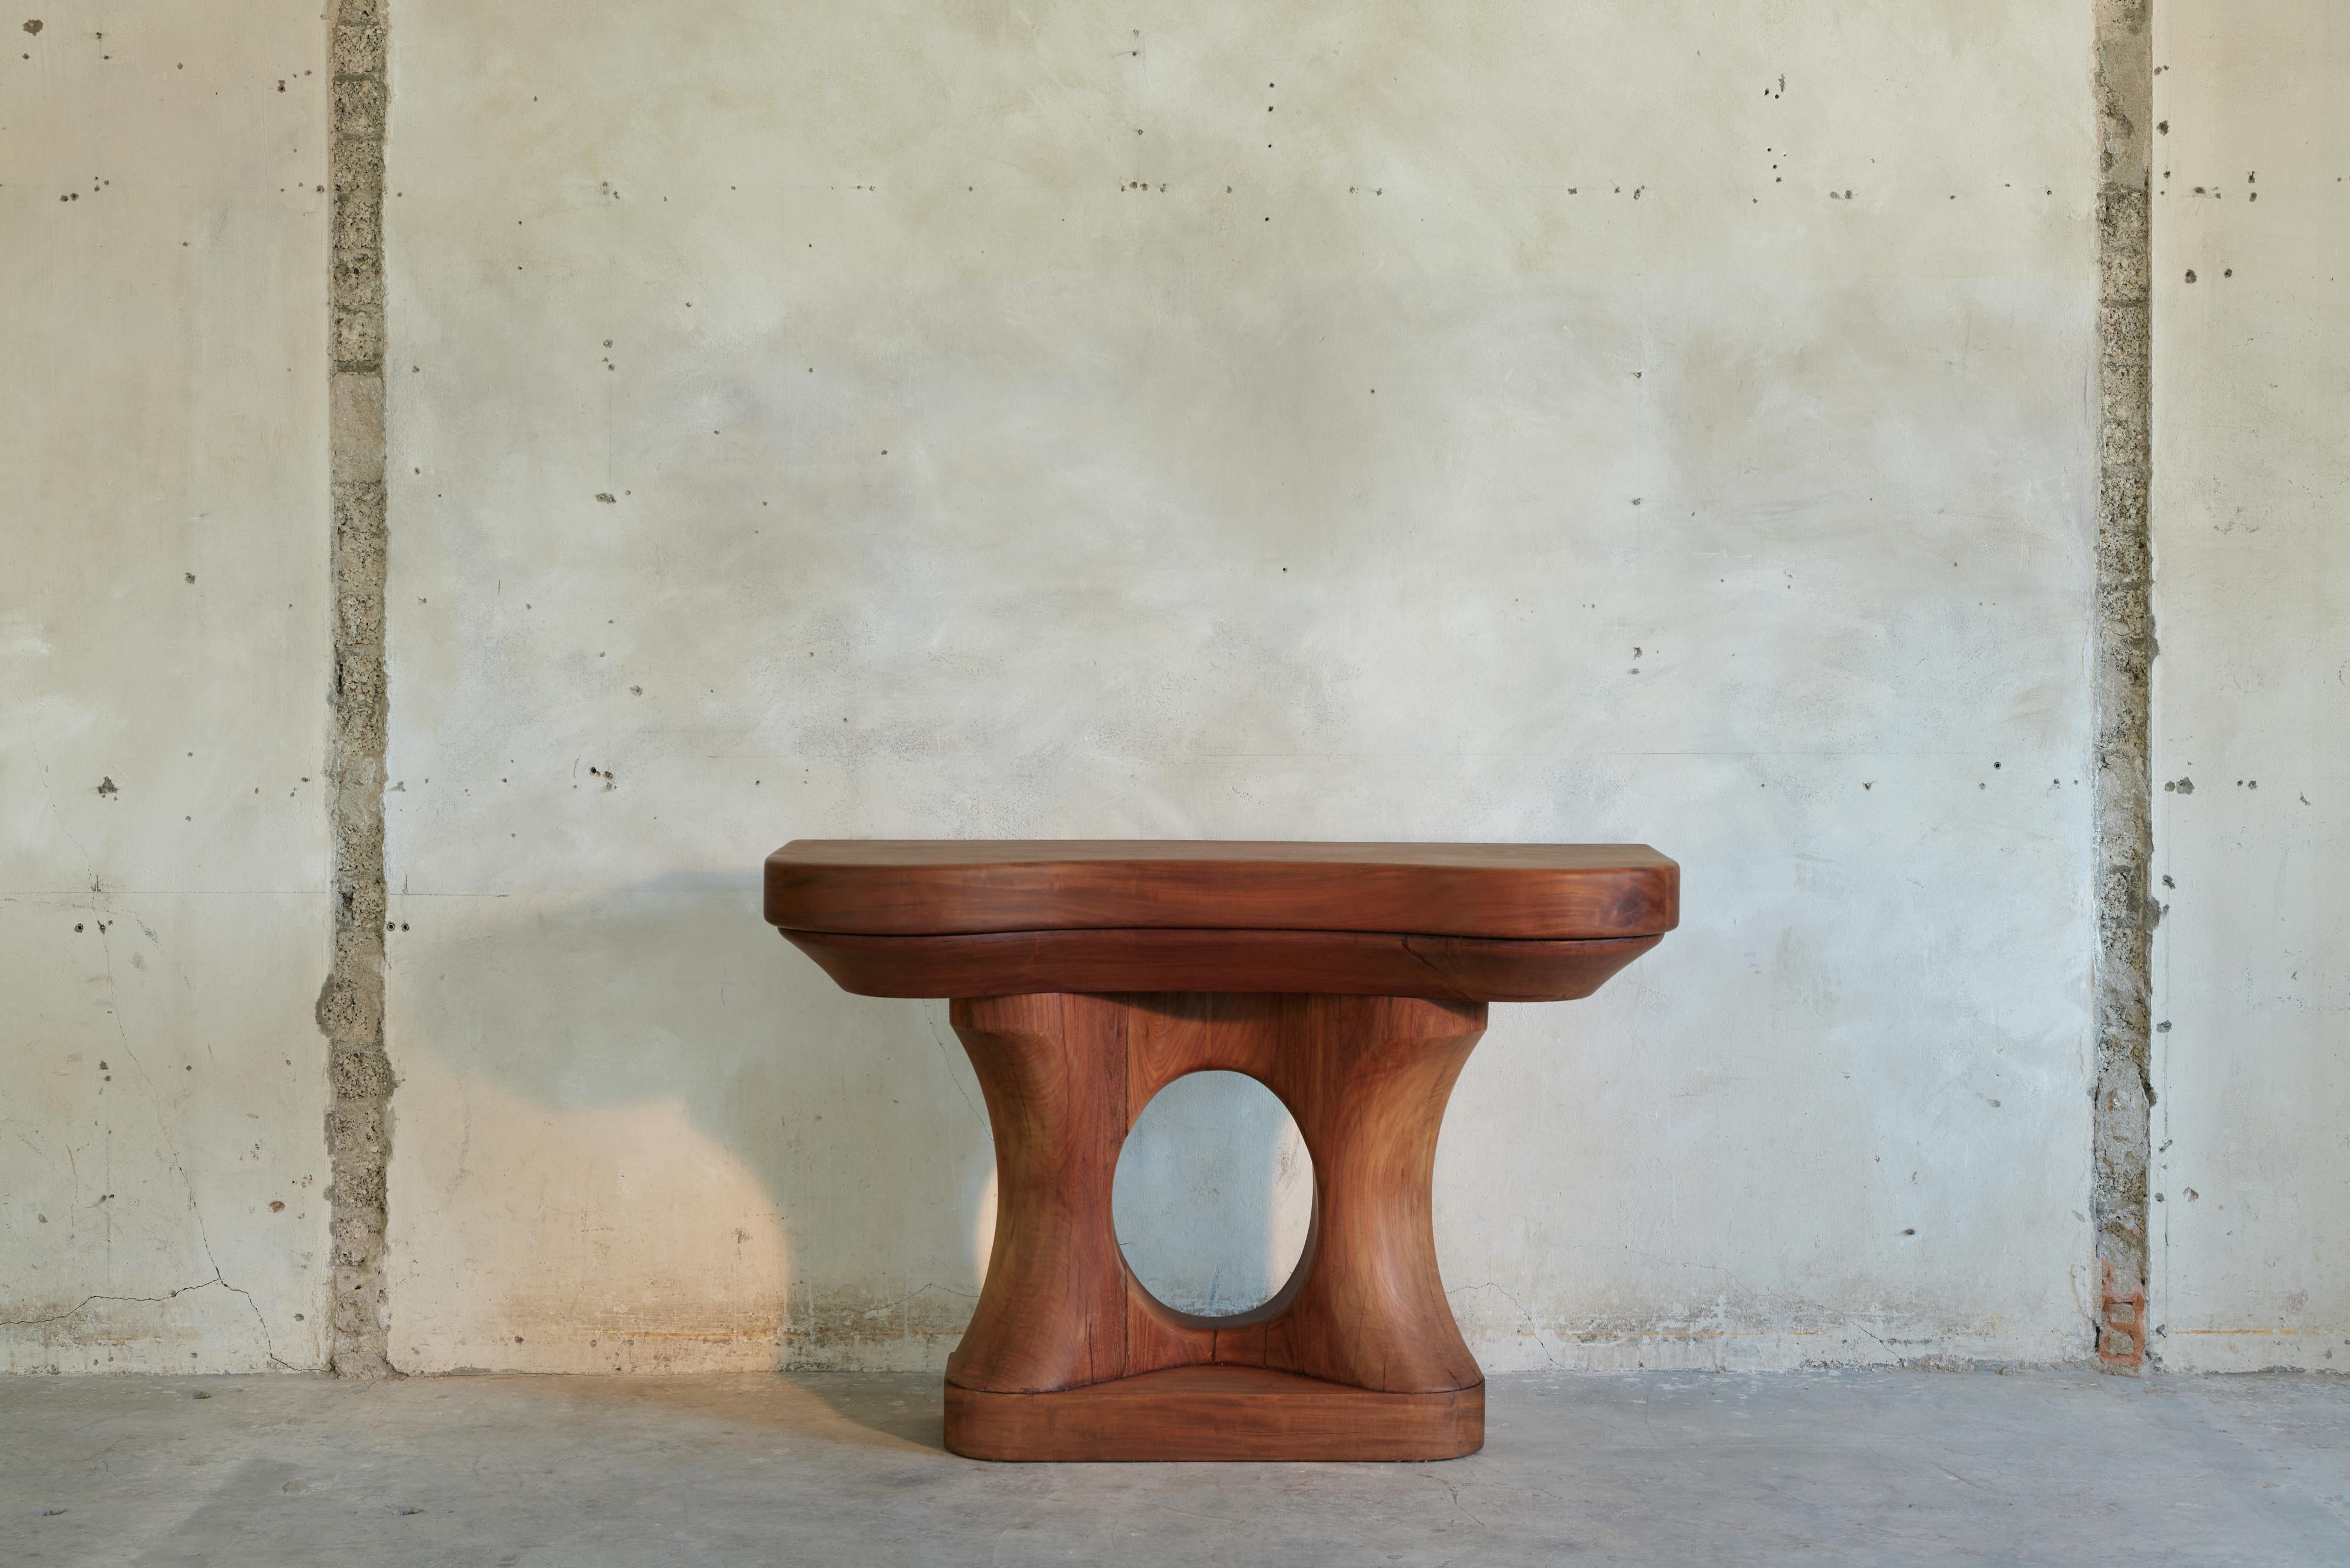 José Zanine Caldas, hand-carved console, Brazilian hardwood, Brazil, circa 1980

This beautifully sculpted console was made during a time in which Caldas abandoned the rigid design aesthetics of Modernism and solely worked with local materials.